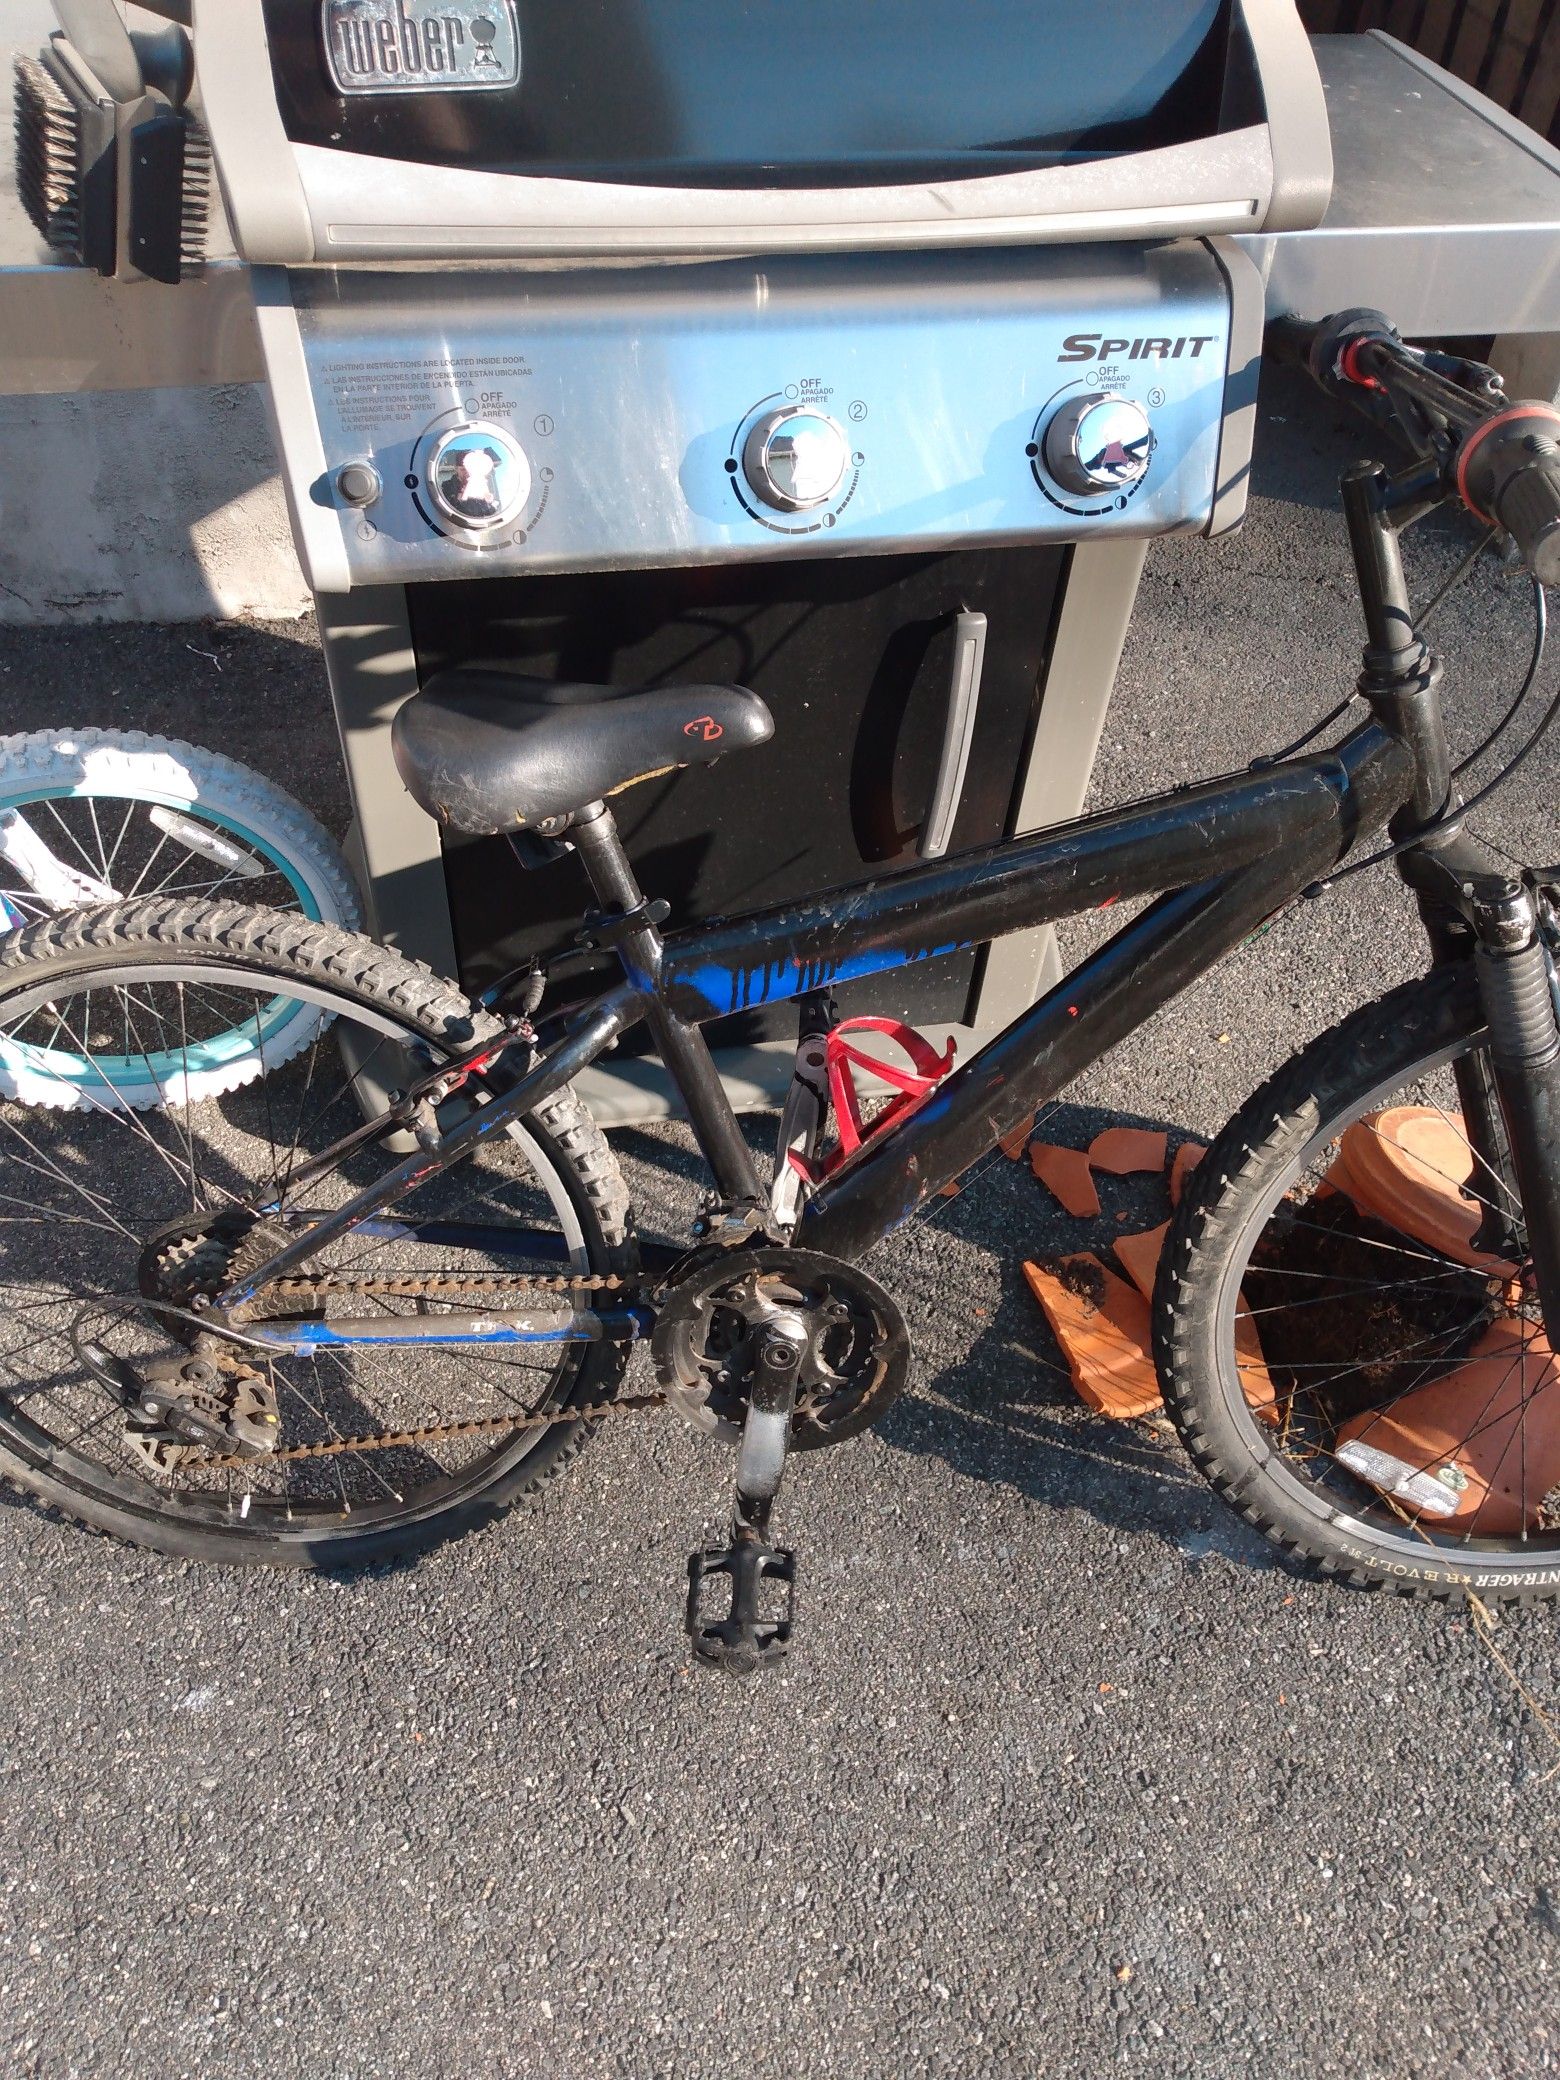 18 speed trek mountain bike with front shocks everything works great back tire is flat but sure just needs air